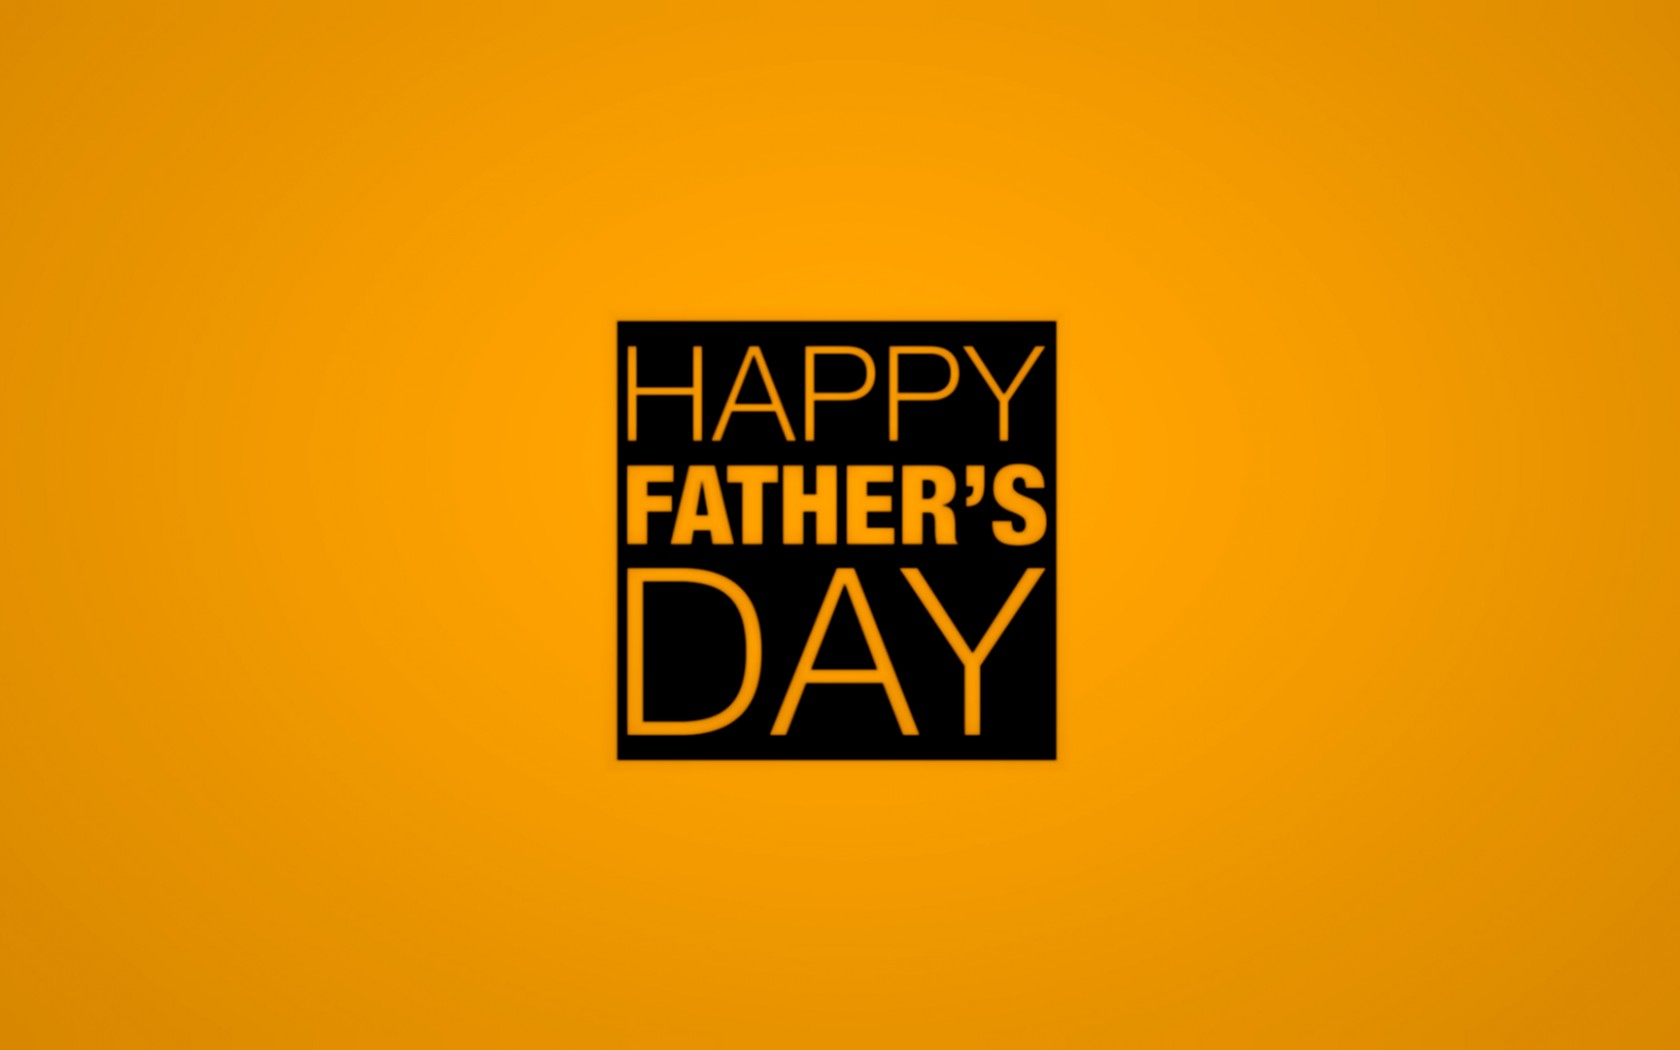 happy fathers day wallpaper,font,text,yellow,logo,orange